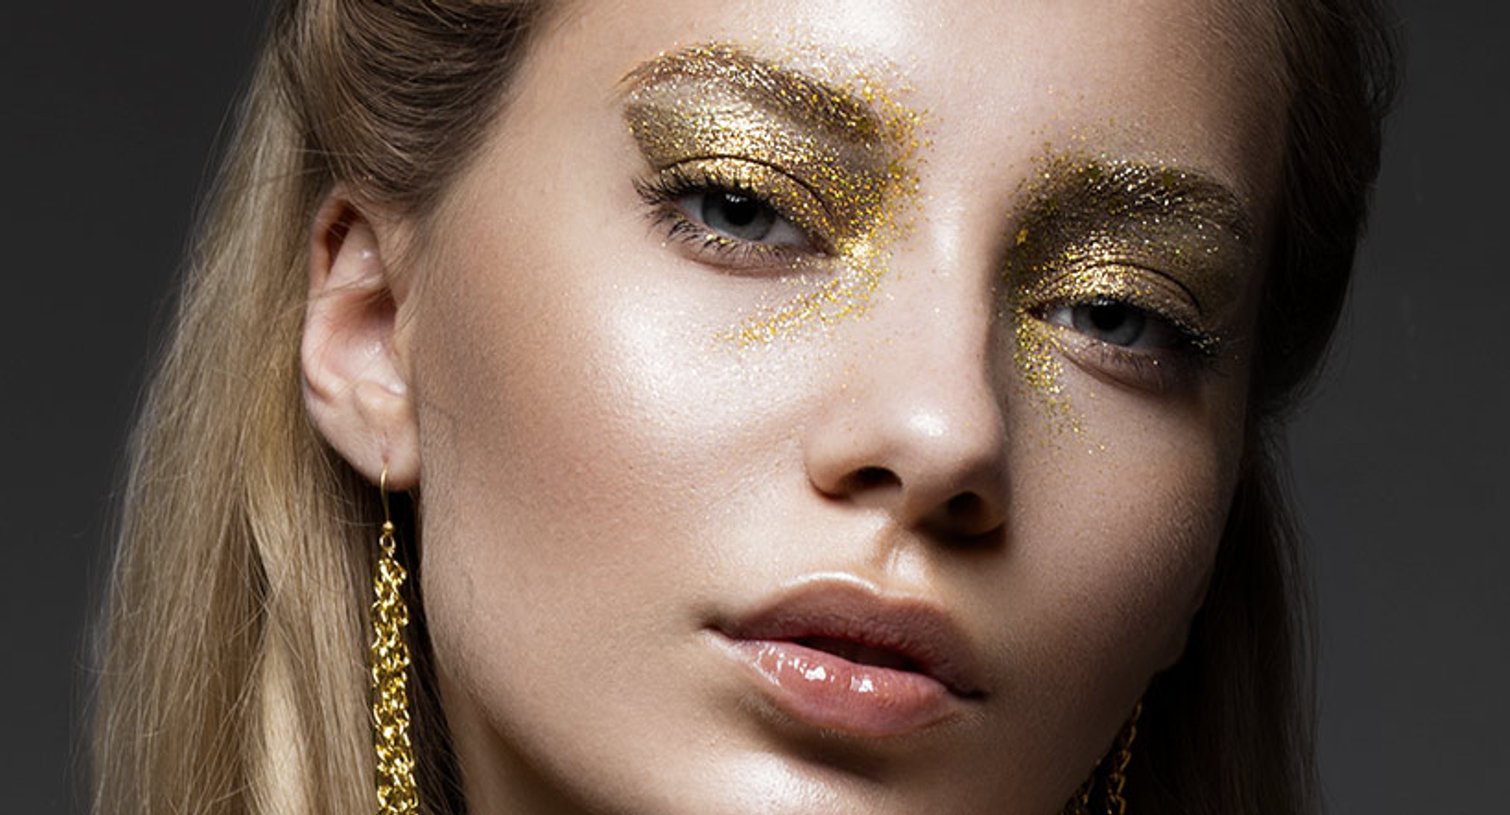 49 Incredibly Beautiful Soft Makeup Looks For Any Occasion : Glam look